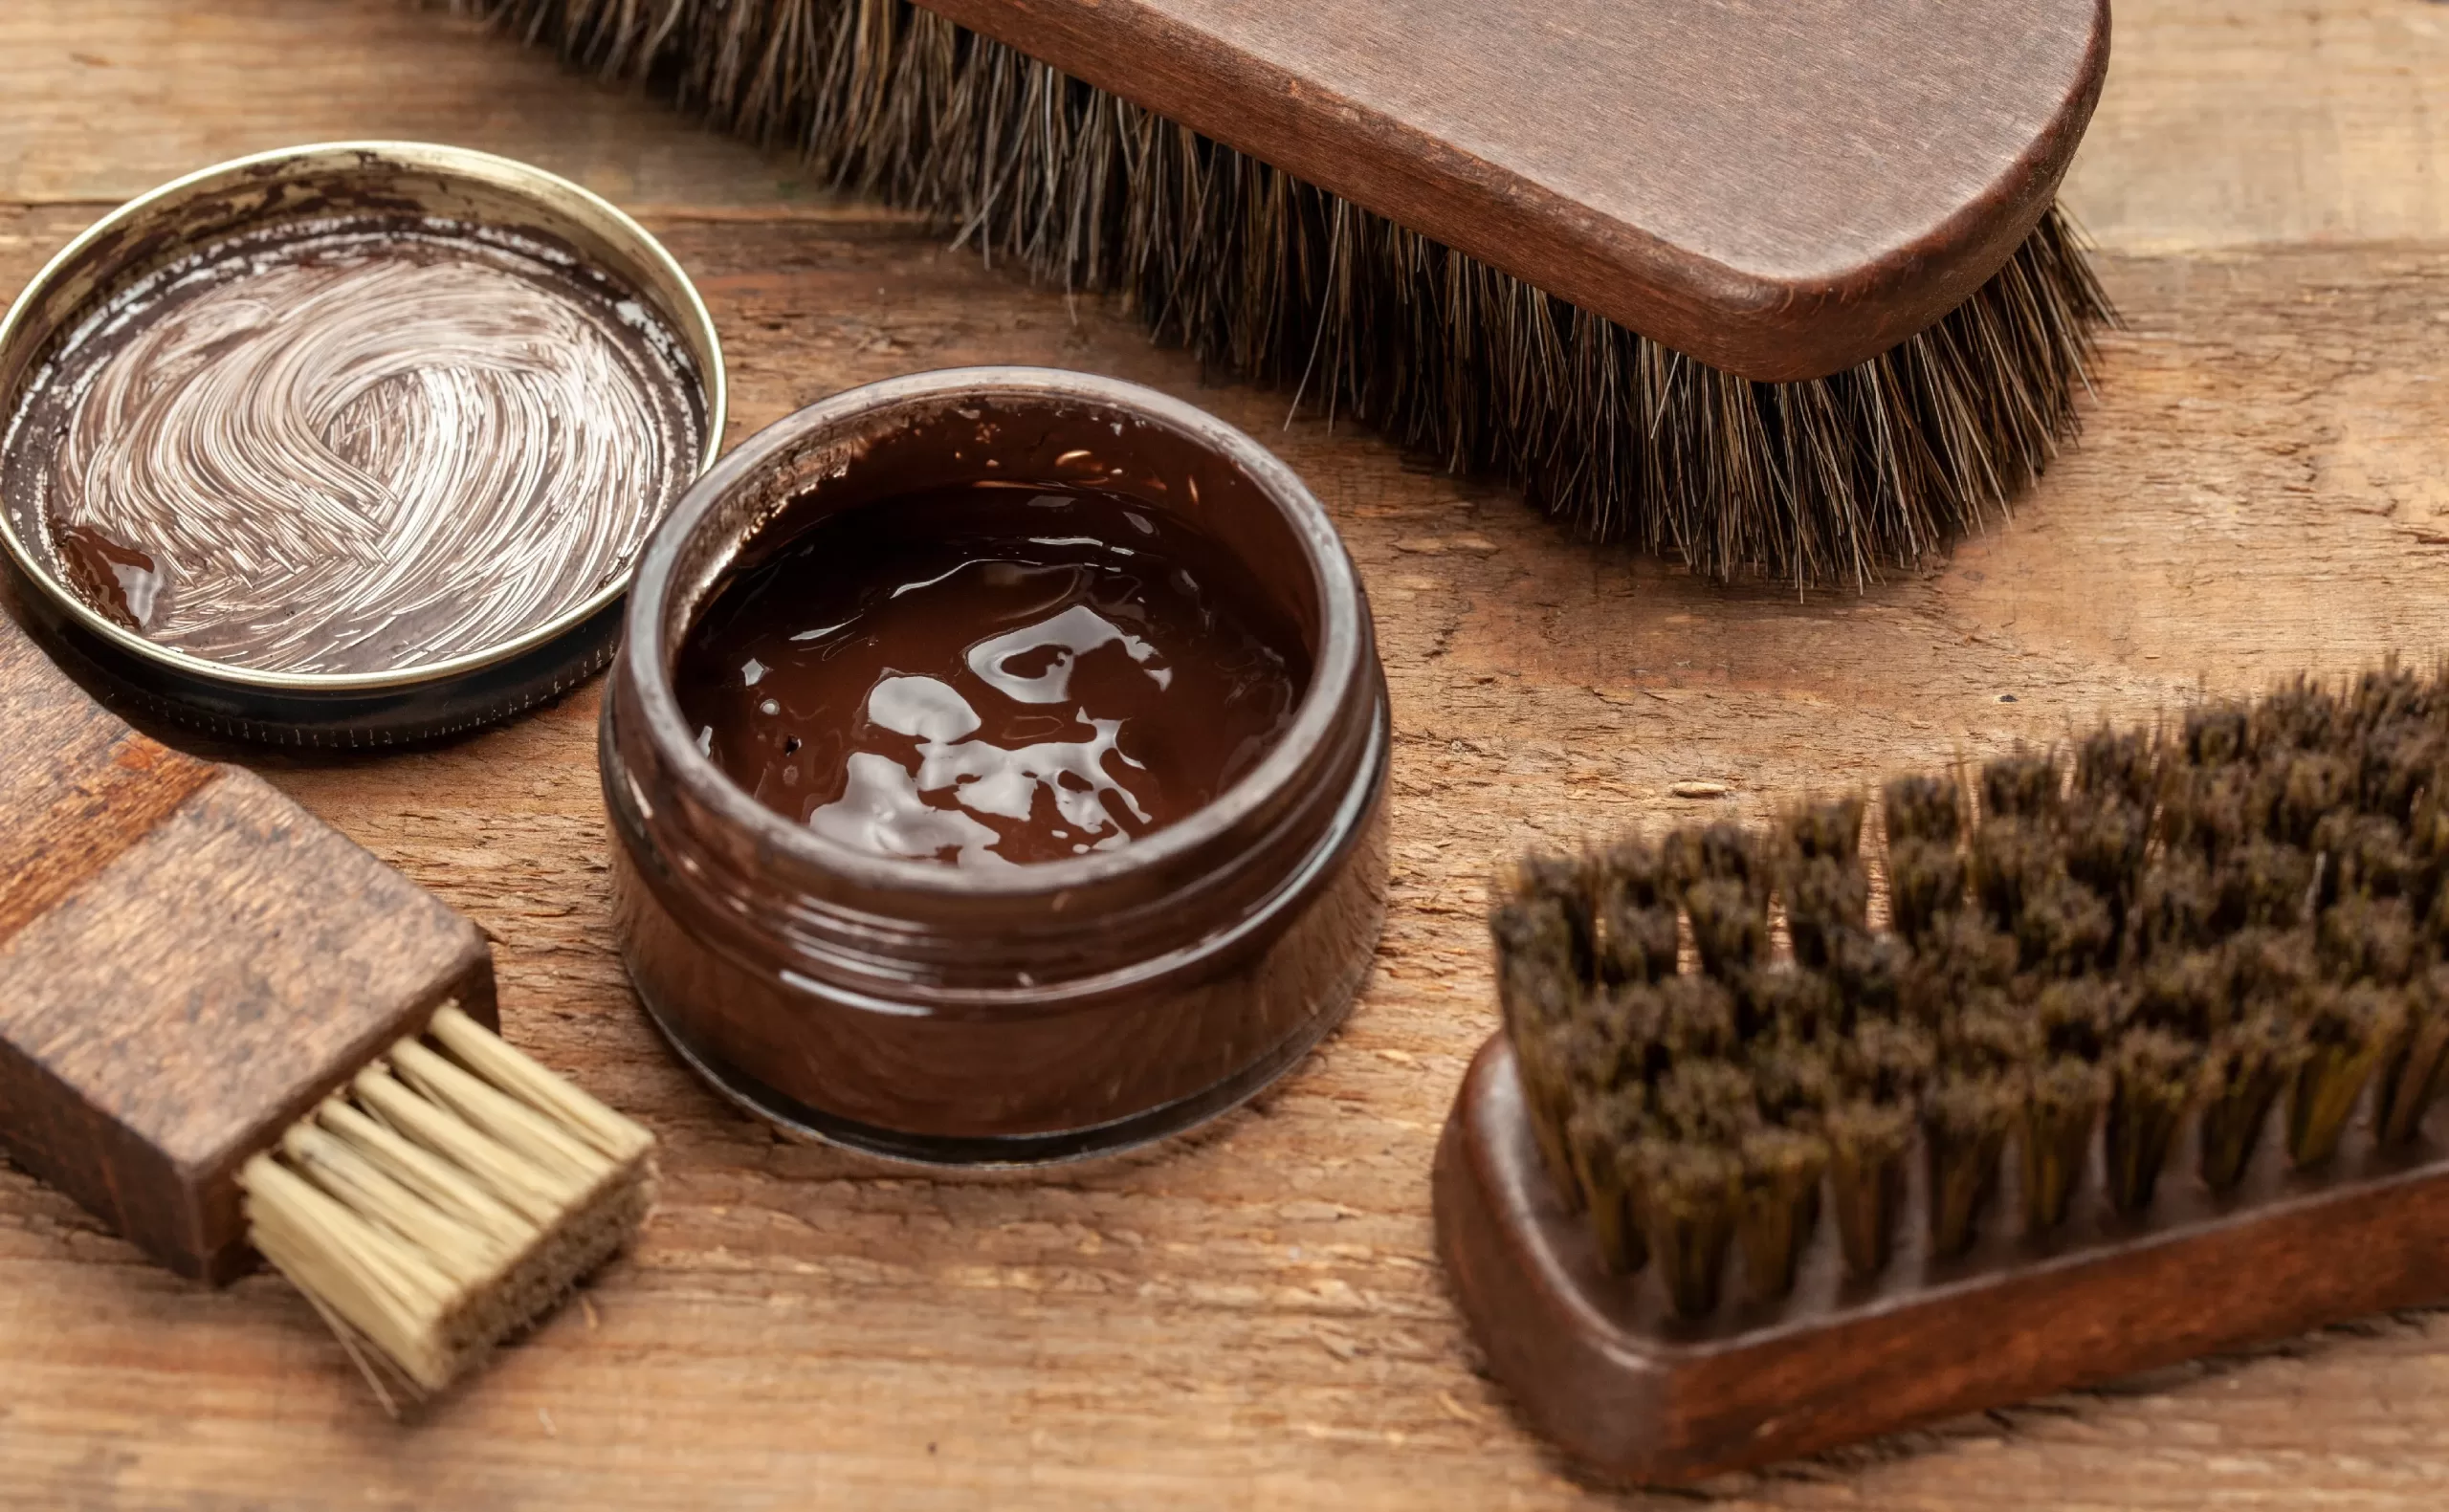 leather shoe polish and brush care products